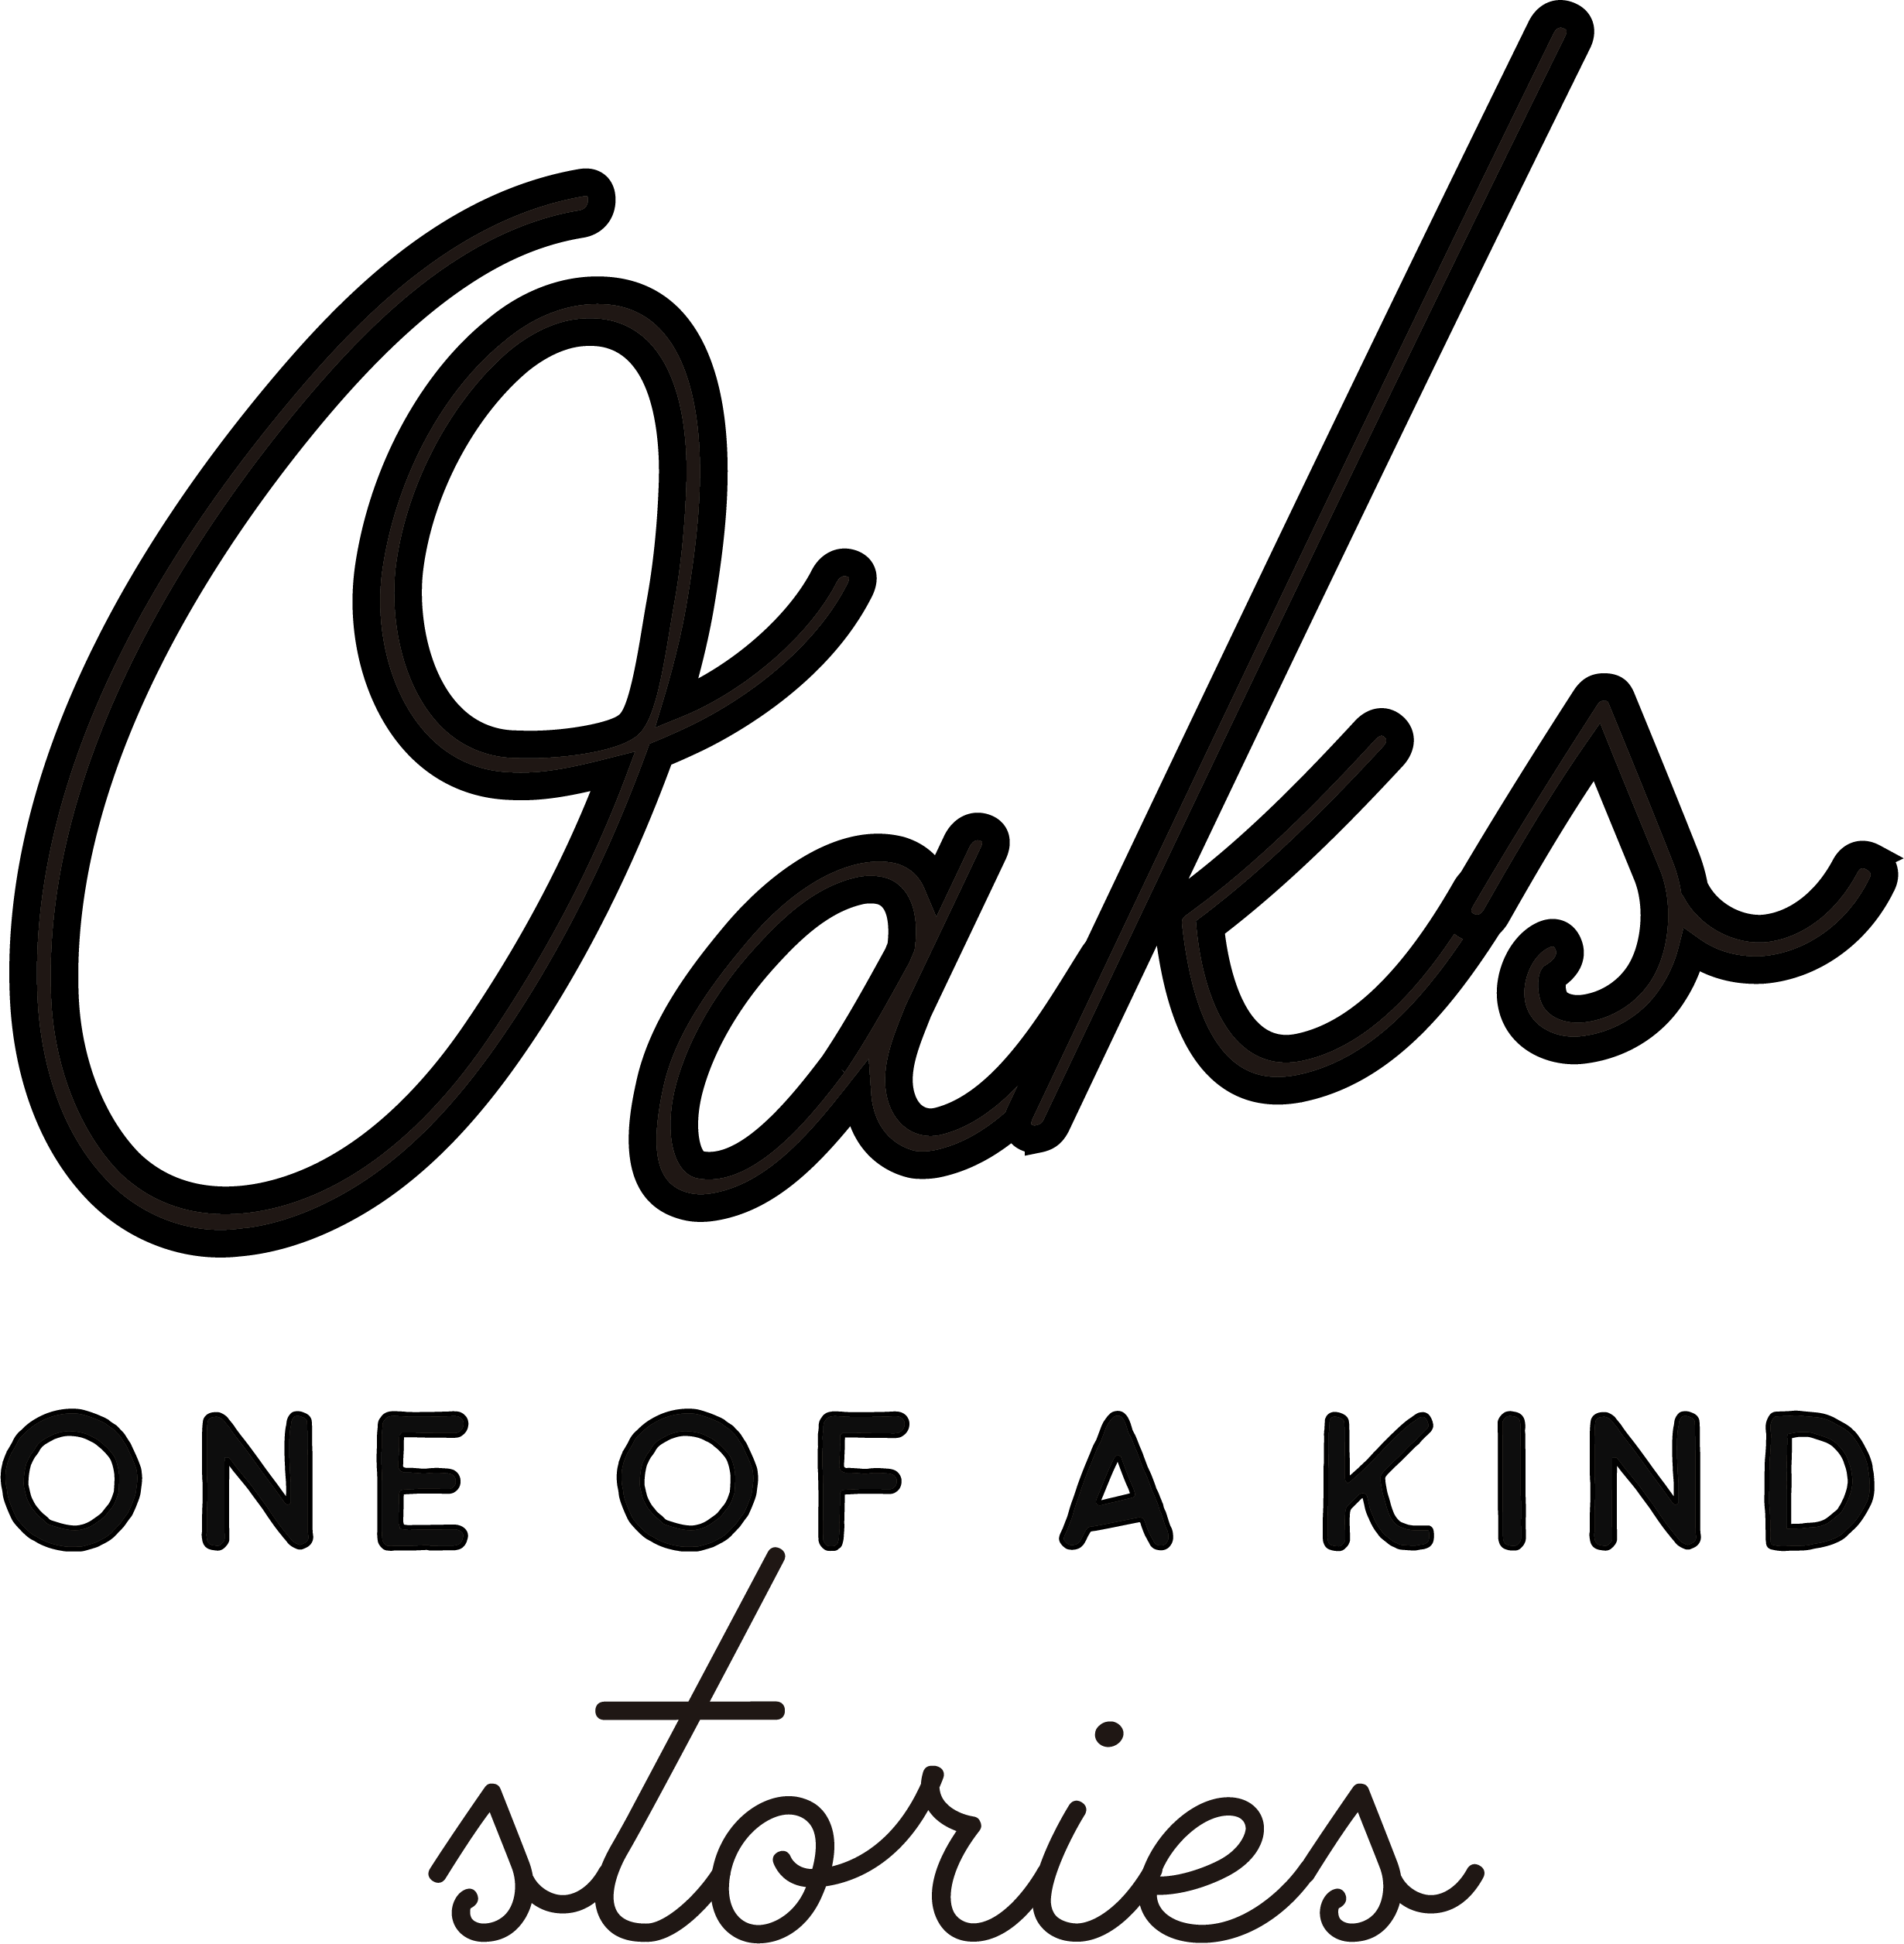 OAKS - One of a Kind Stories